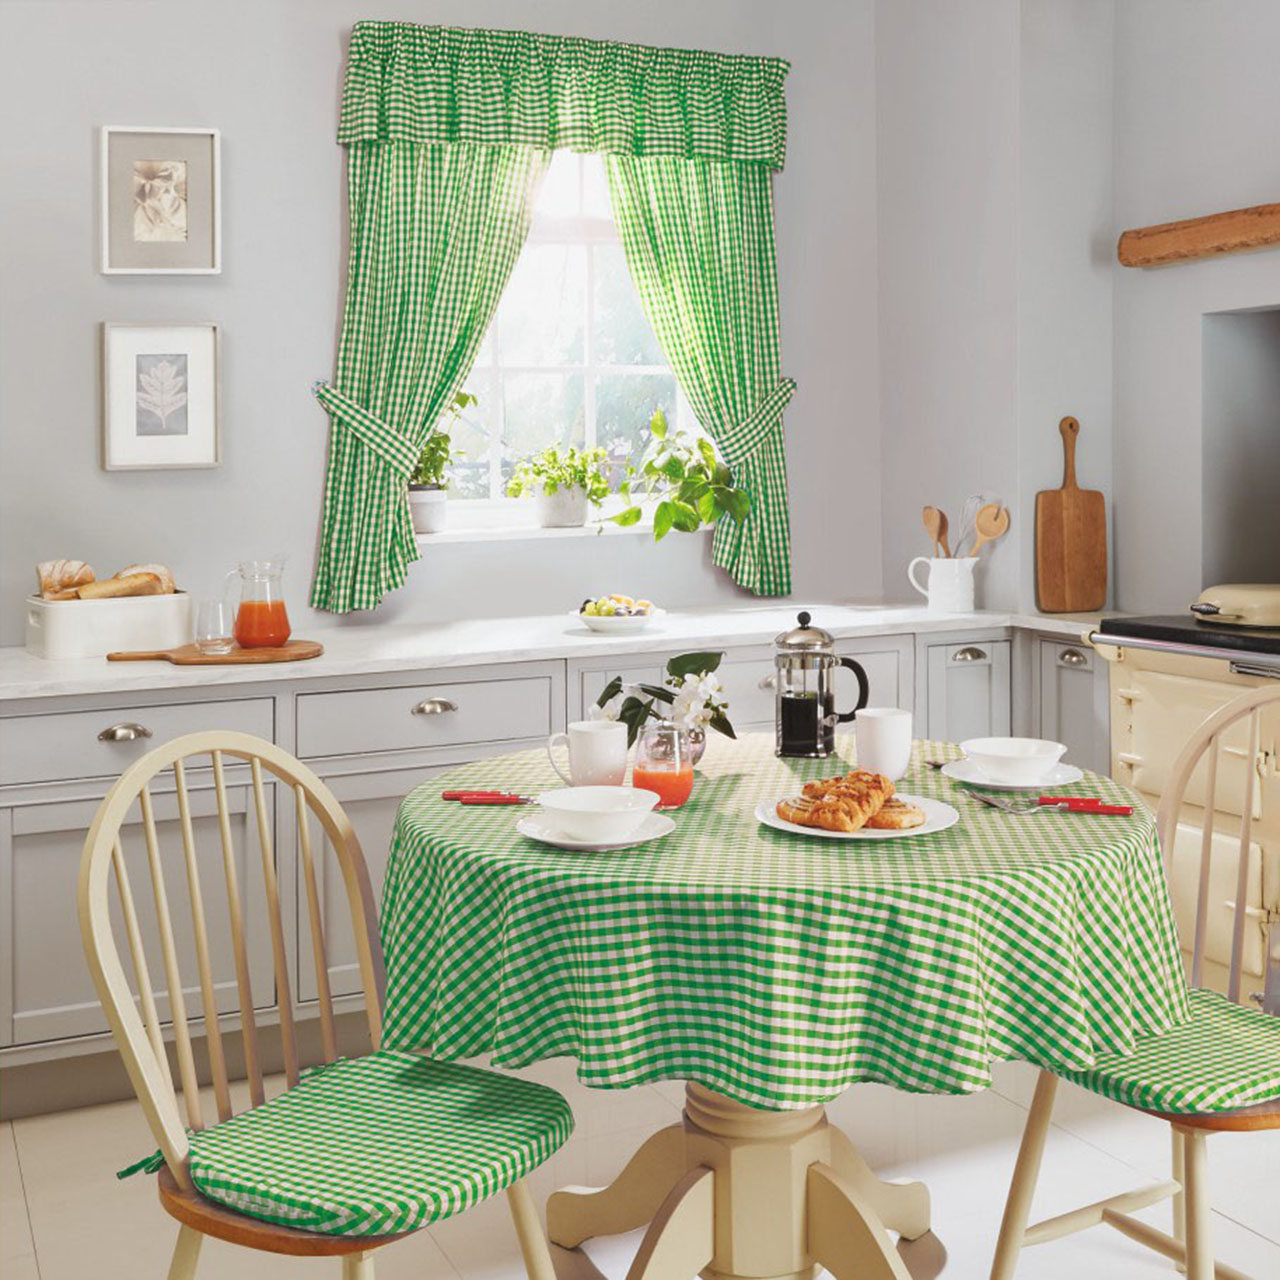 Gingham Kitchen Curtains with Taped Headers